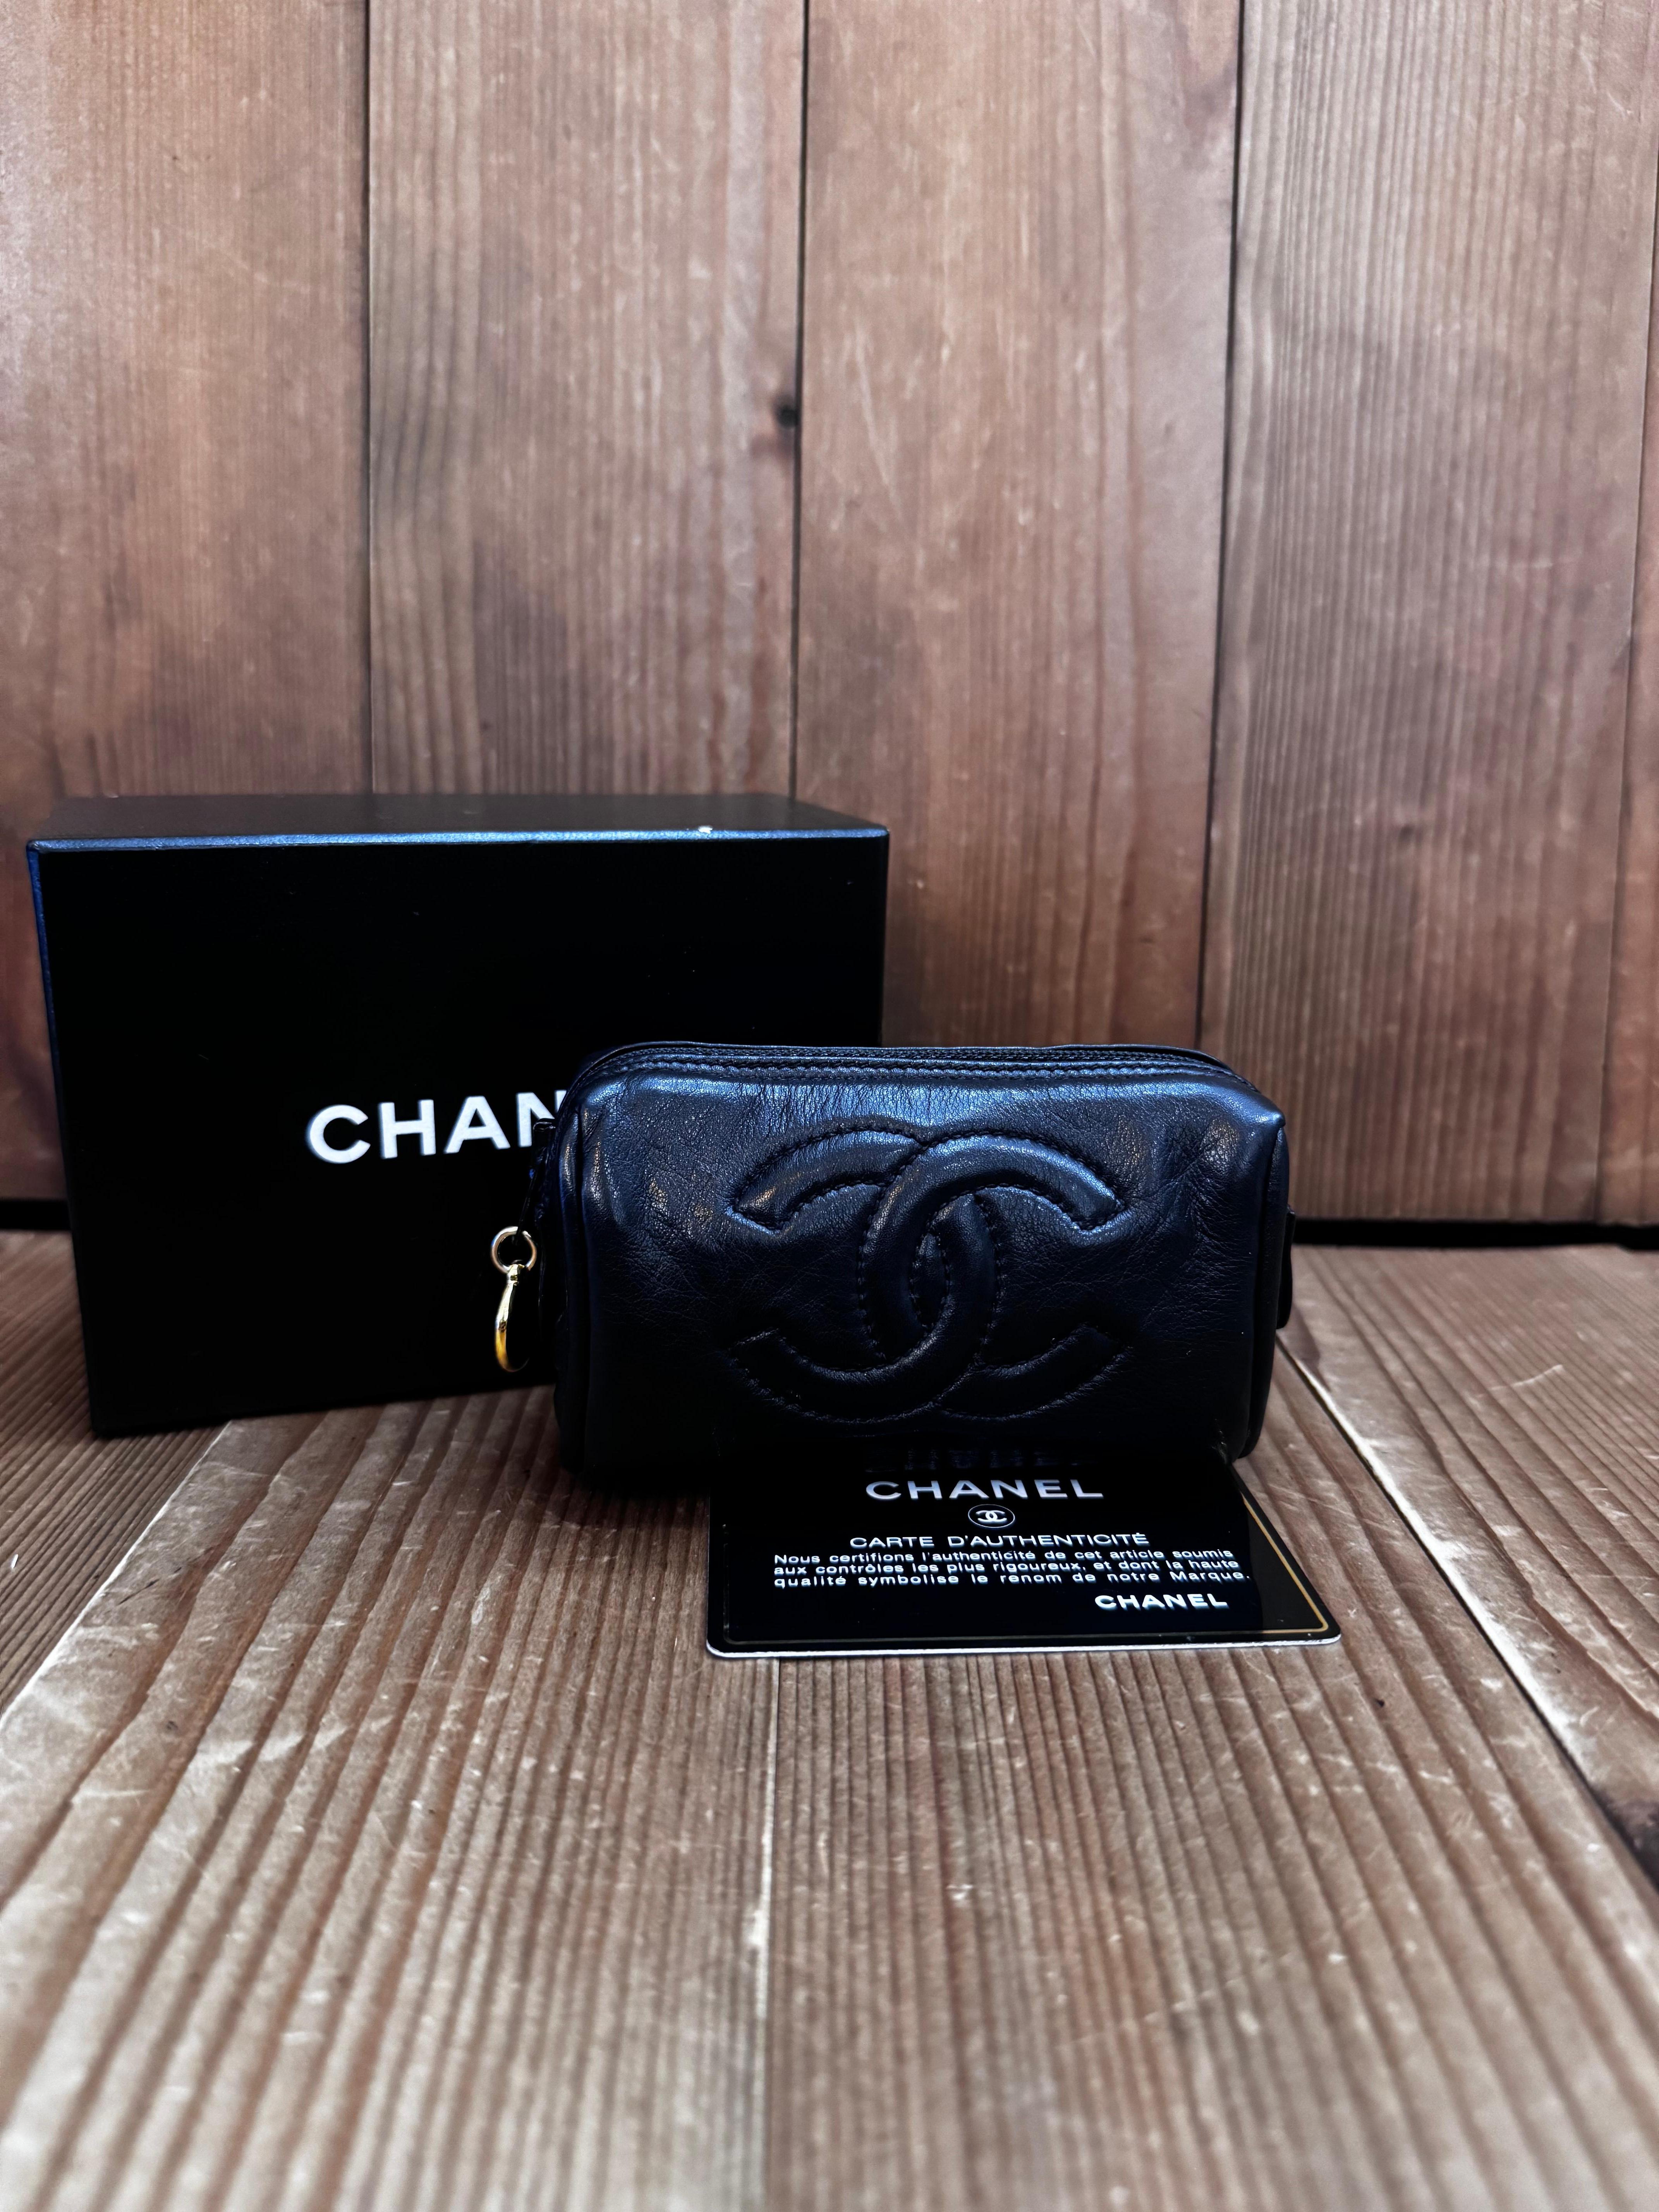 This vintage CHANEL mini pouch is crafted of calfskin leather in black featuring gold toned hardware. Top zipper closure opens to a beige lambskin interior. Measures approximately 4 x 2.5 x 1.75 inches. Made in Italy 3xxxxxx holo series. Comes with